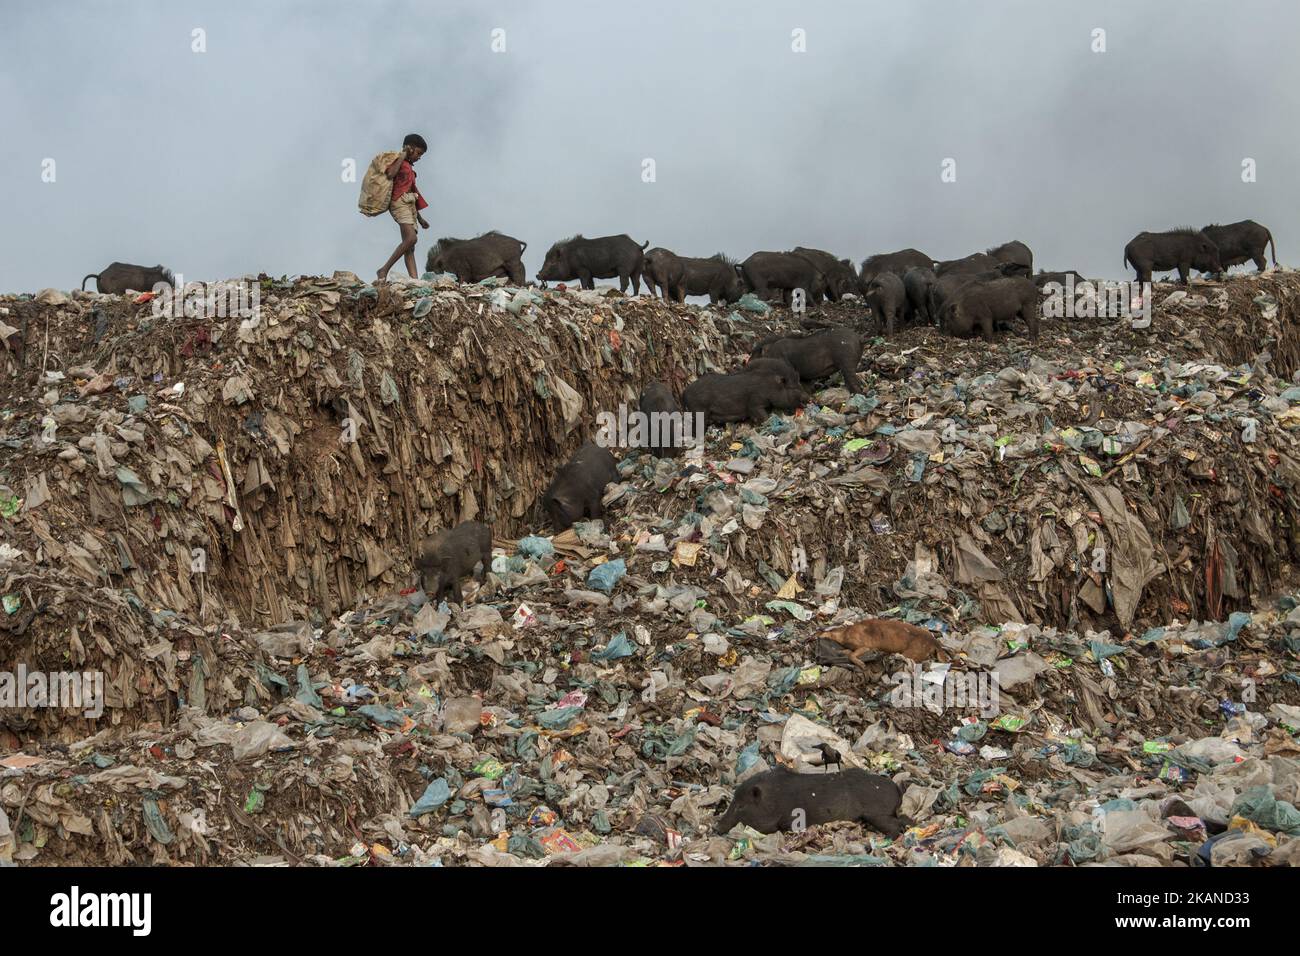 Mountains of Plastic bags in Dhaka, Bangladesh on 30 May 2017. Bangladesh became the first country to regulate disposable bag use when the government banned single-use plastic bags in 2002. At that time environmental groups estimated that about 9.3 million plastic bags were dumped in the Dhaka city alone every day, with only 10-15% being put in dustbins. Despite an awareness program warning of a steep fine and six months of imprisonment, after about a year the plastic bags began to excess the market again due to a lack of enforcement. One of the major impacts of plastic bags in Bangladesh is  Stock Photo